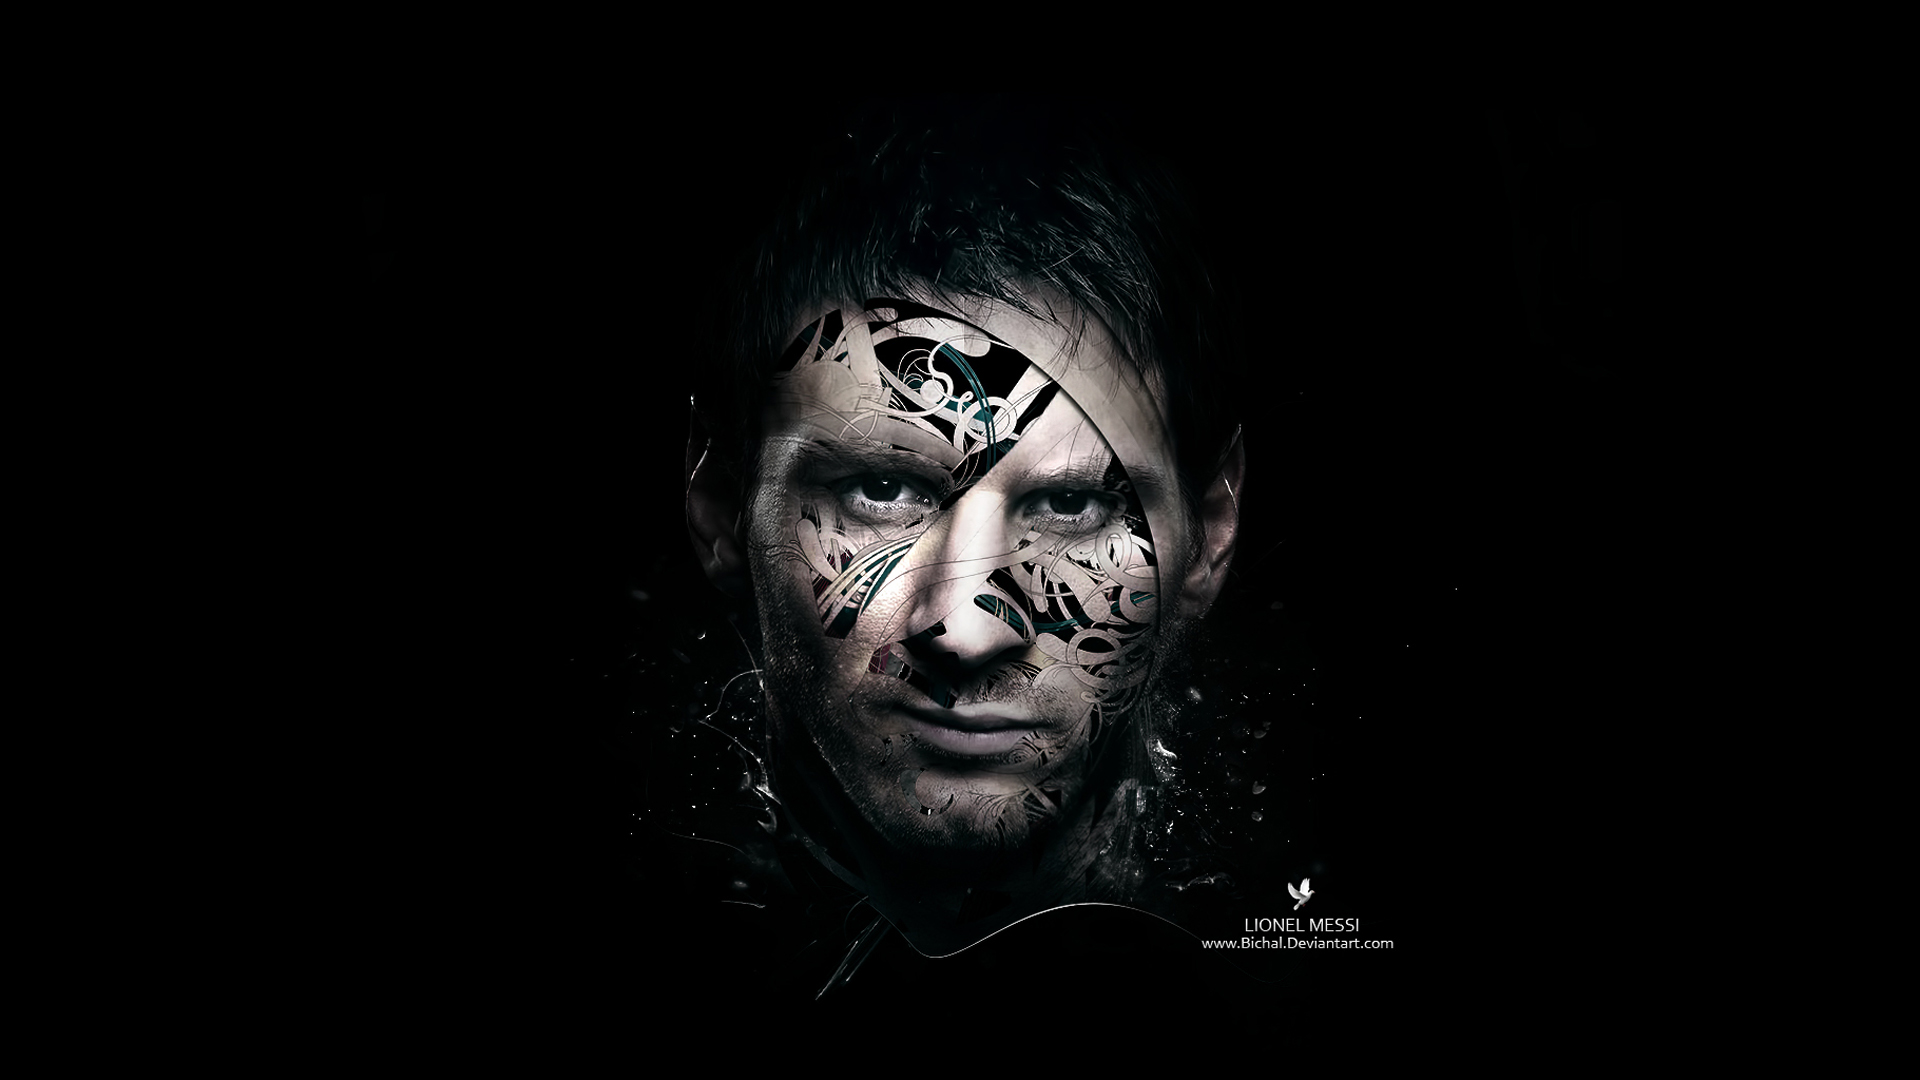 Lionel Messi Background   Wallpaper High Definition High Quality 1920x1080